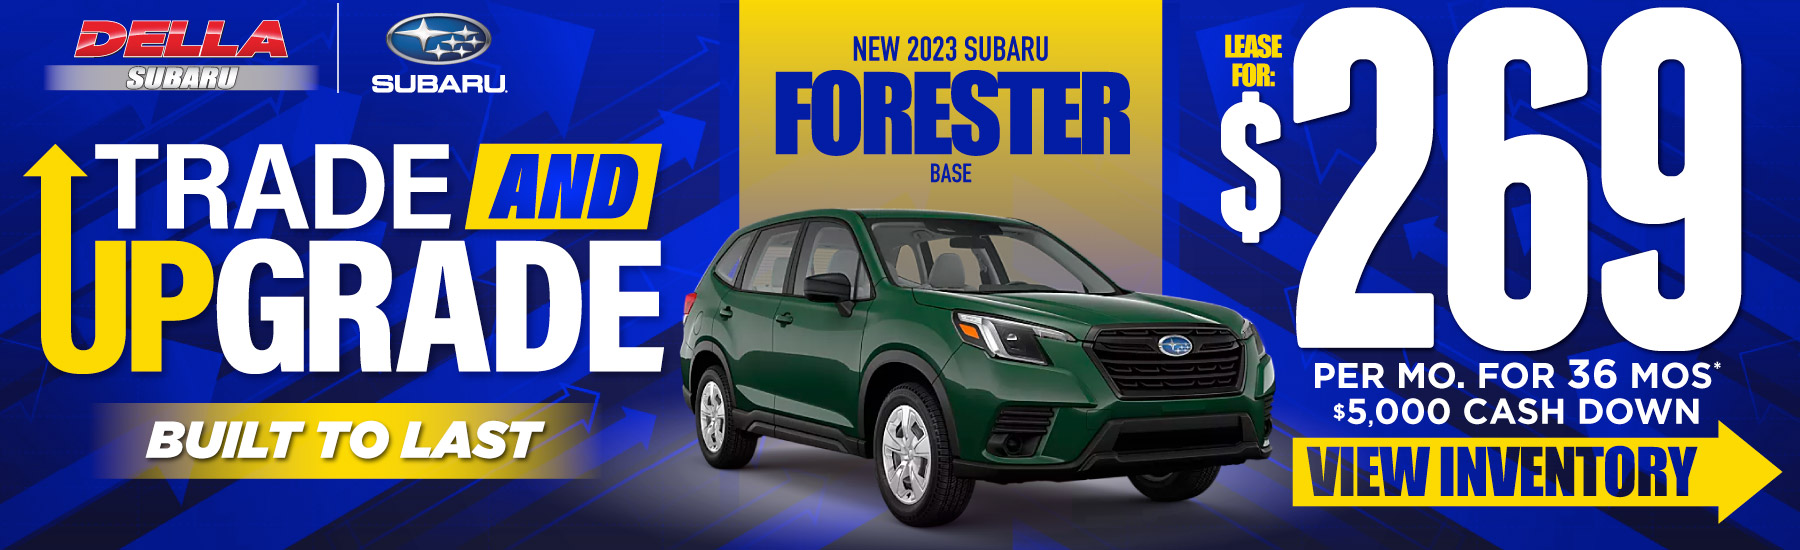 New 2022 Subabru Forester Premium - Lease for $329 a month - ACT NOW